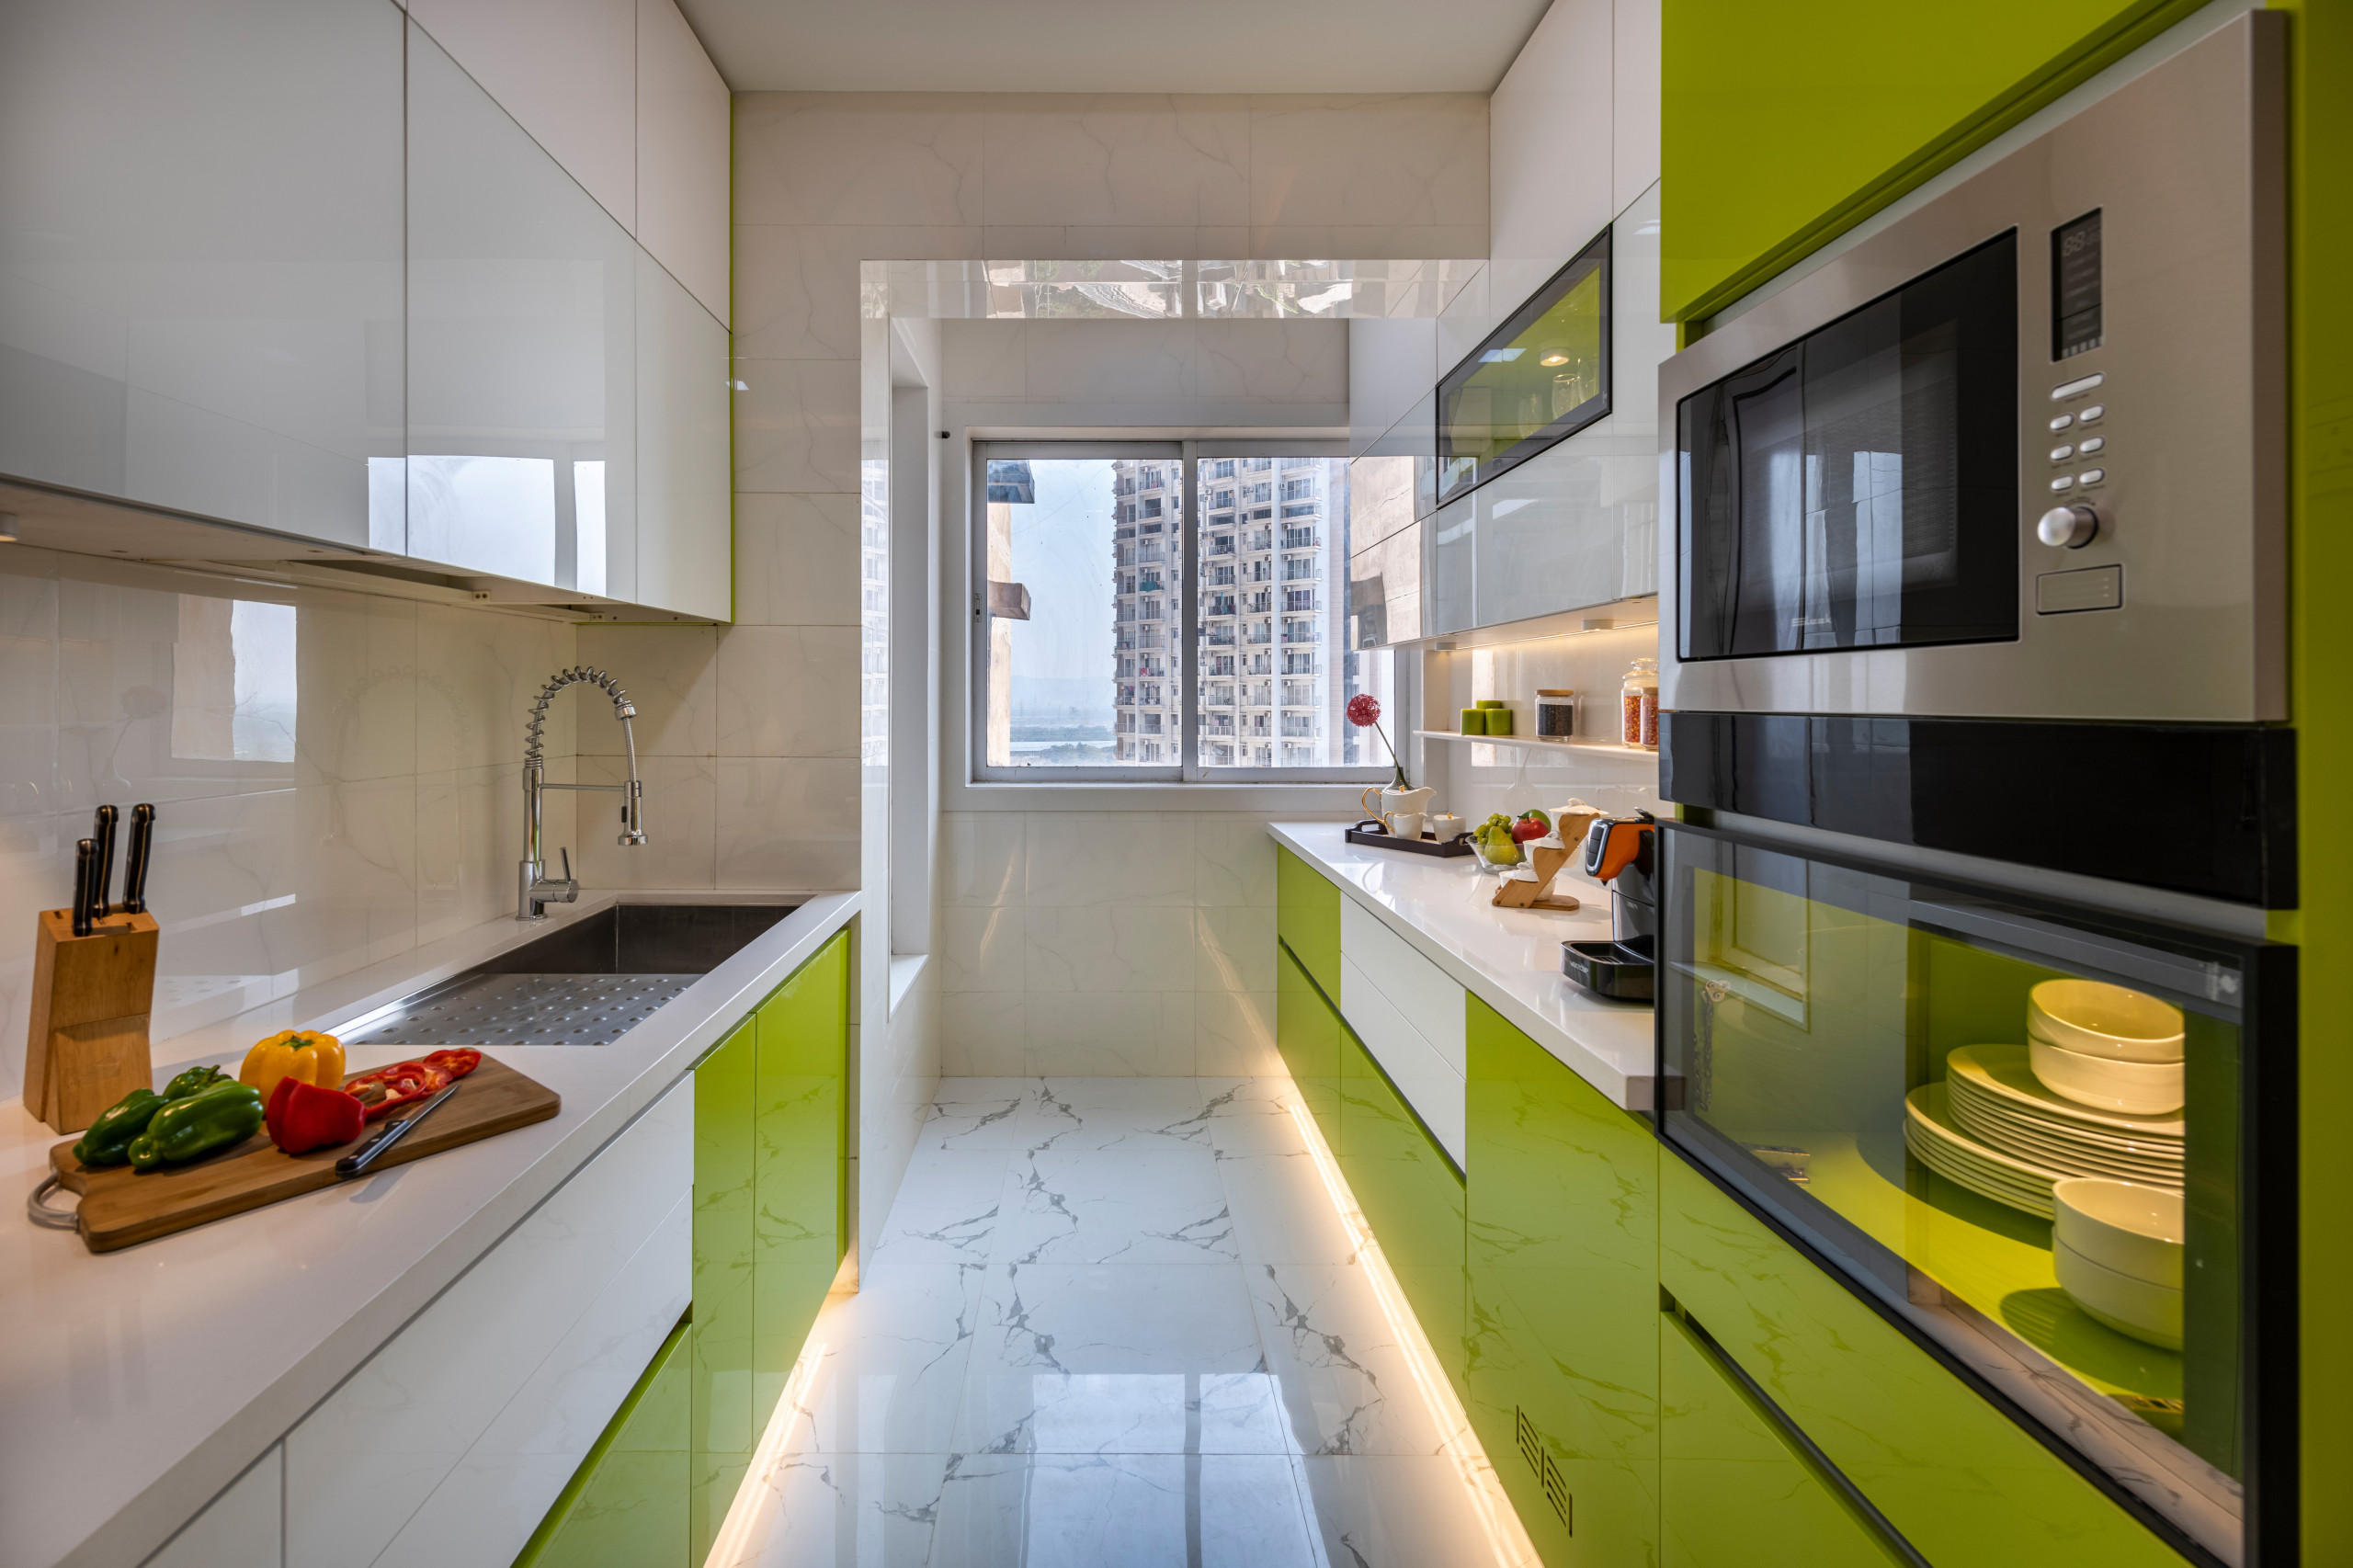 How Kitchen Interior Design Look Like In 2021